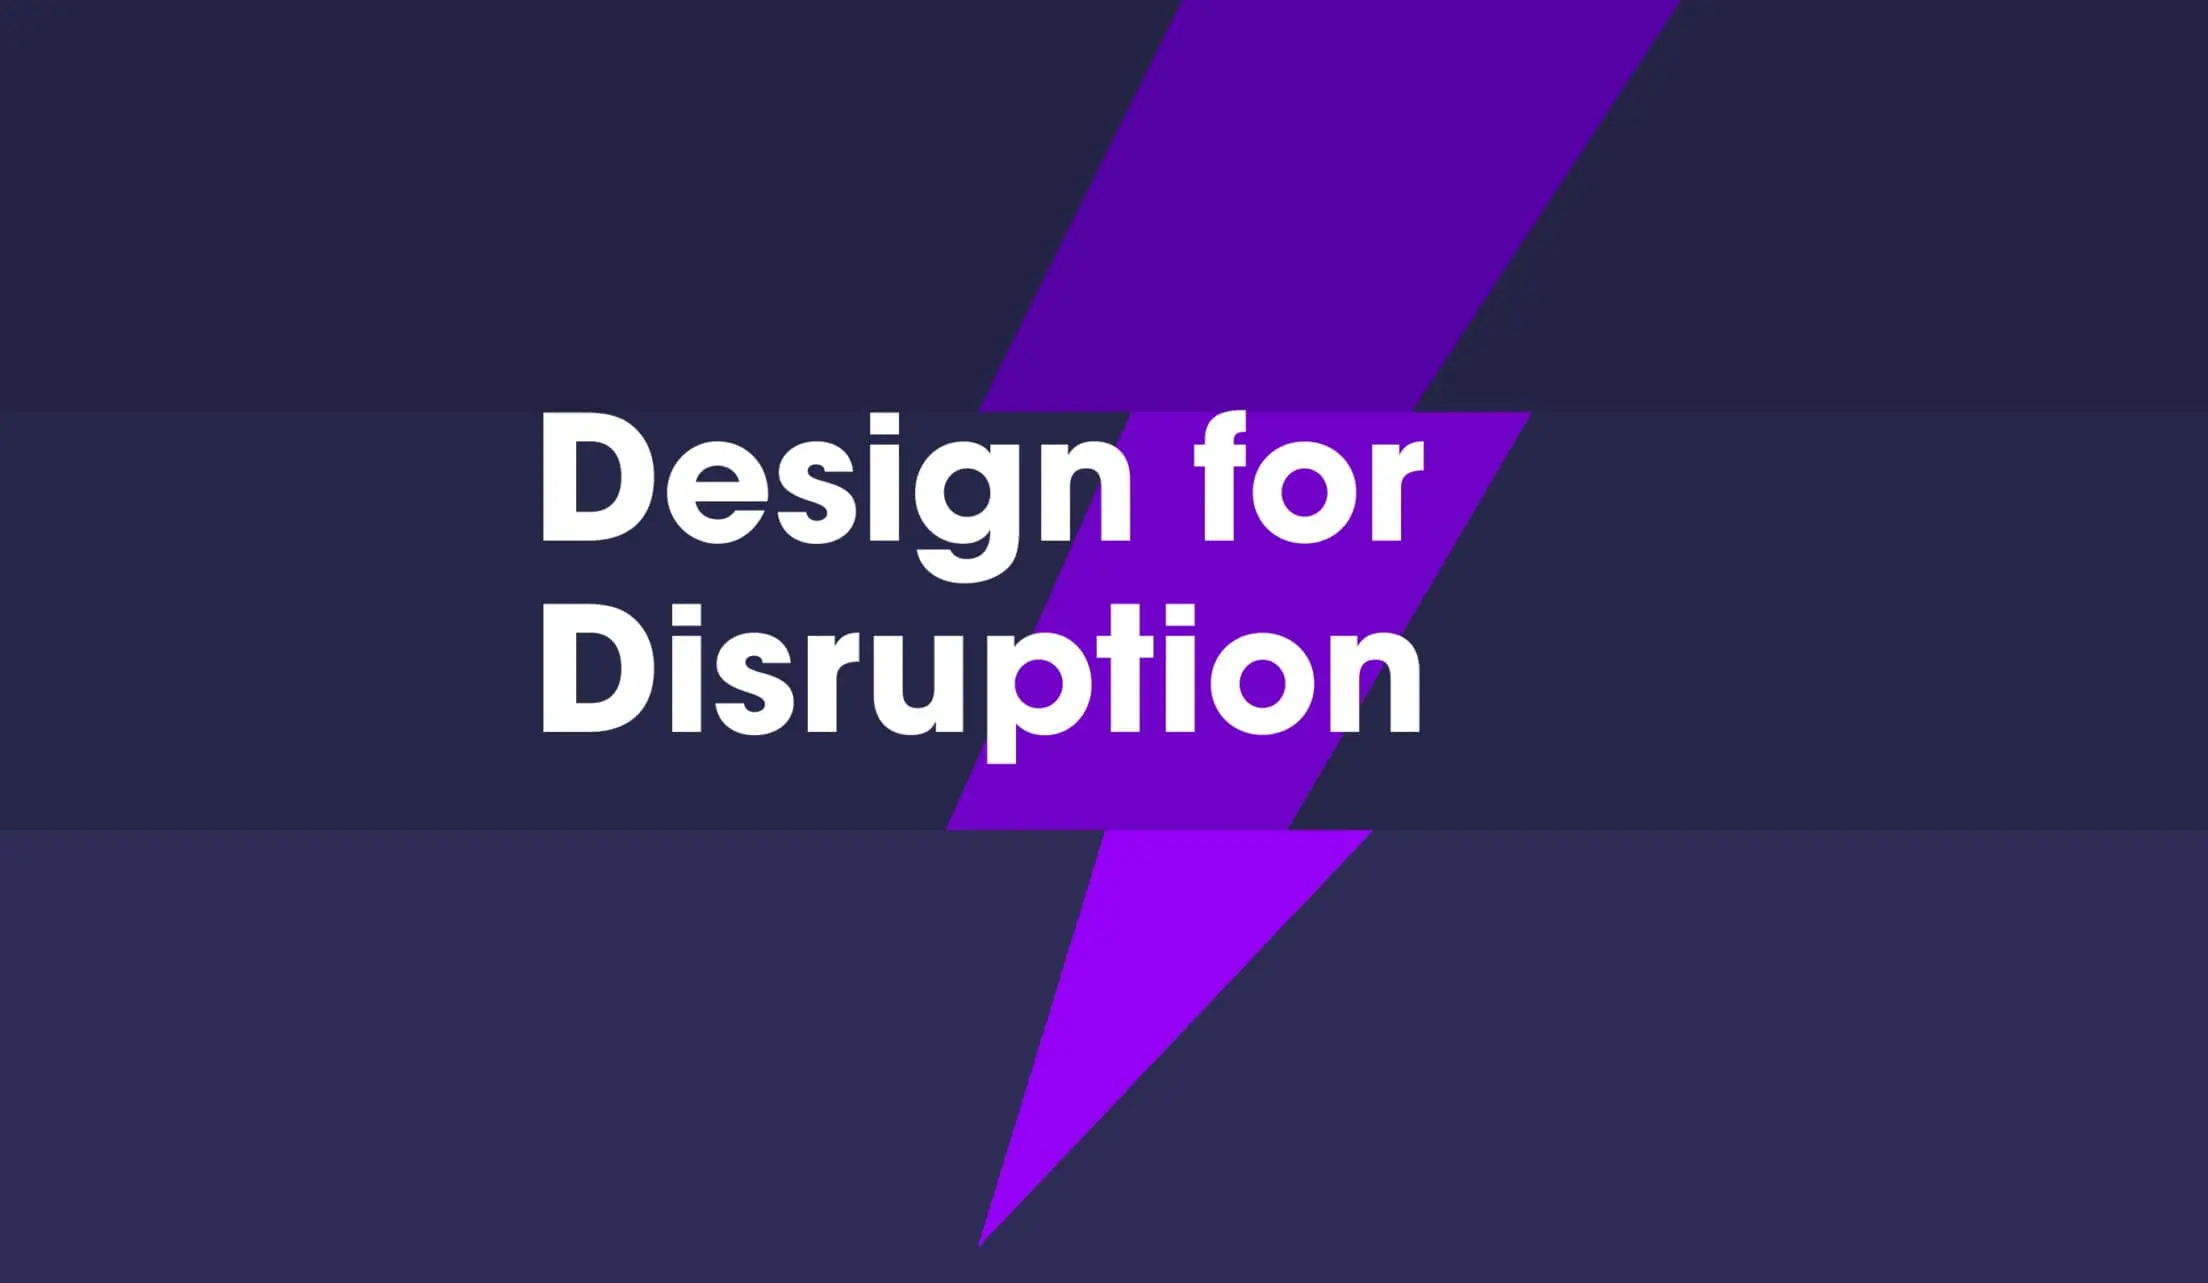 The image features the text "Design for Disruption" in bold white letters against a dark blue background with a prominent purple lightning bolt running diagonally through the center.